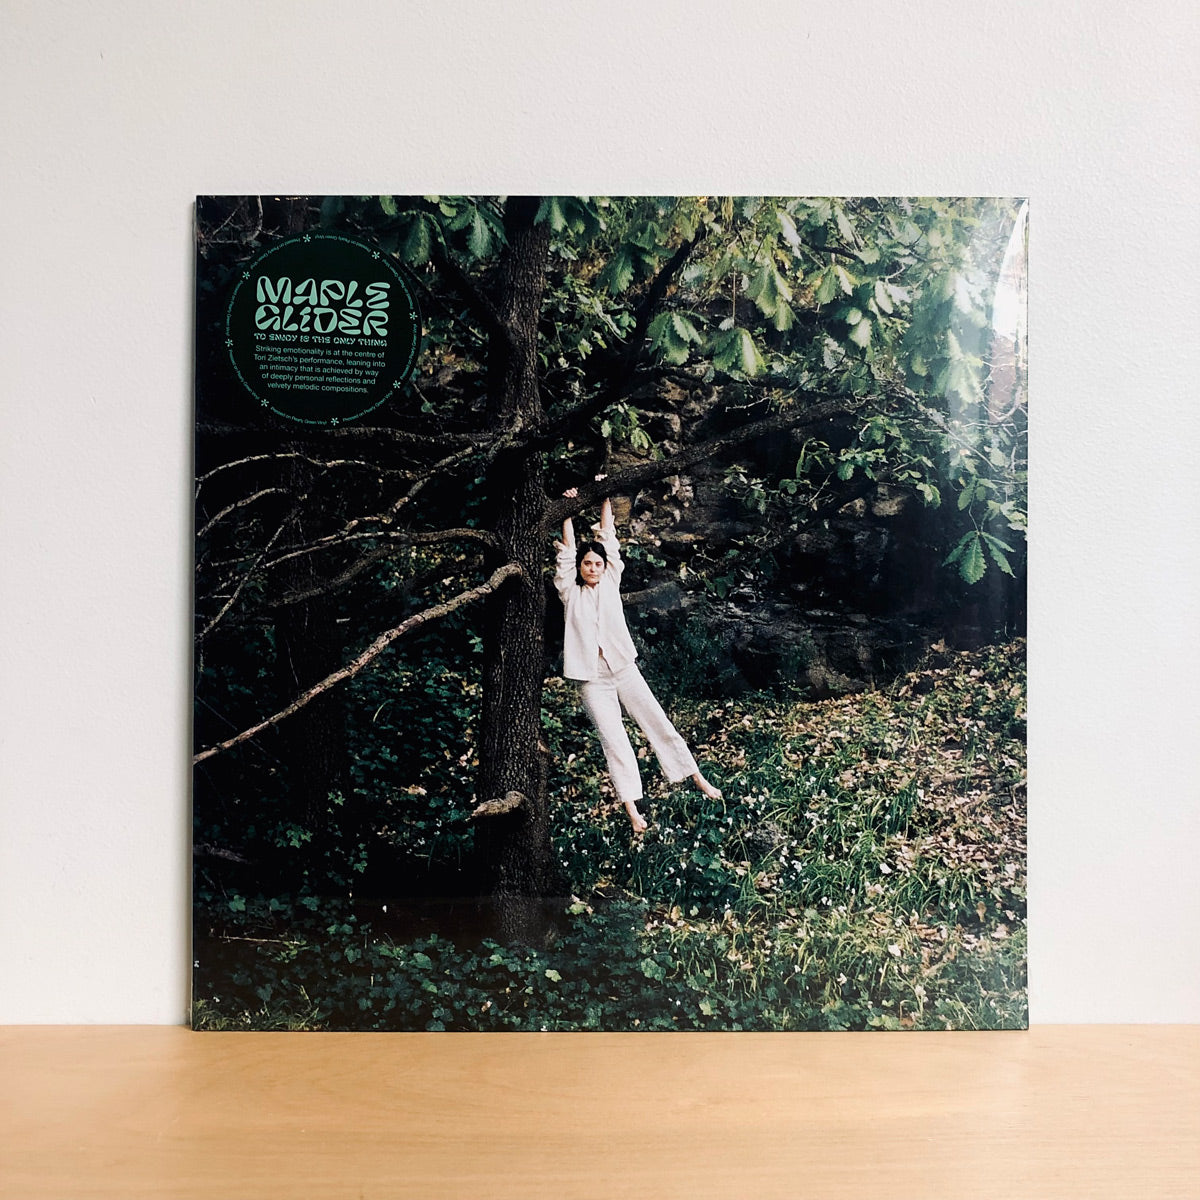 Maple Glider - To Enjoy Is The Only Thing. LP [Pearly Green Vinyl w. Bonus 7"]